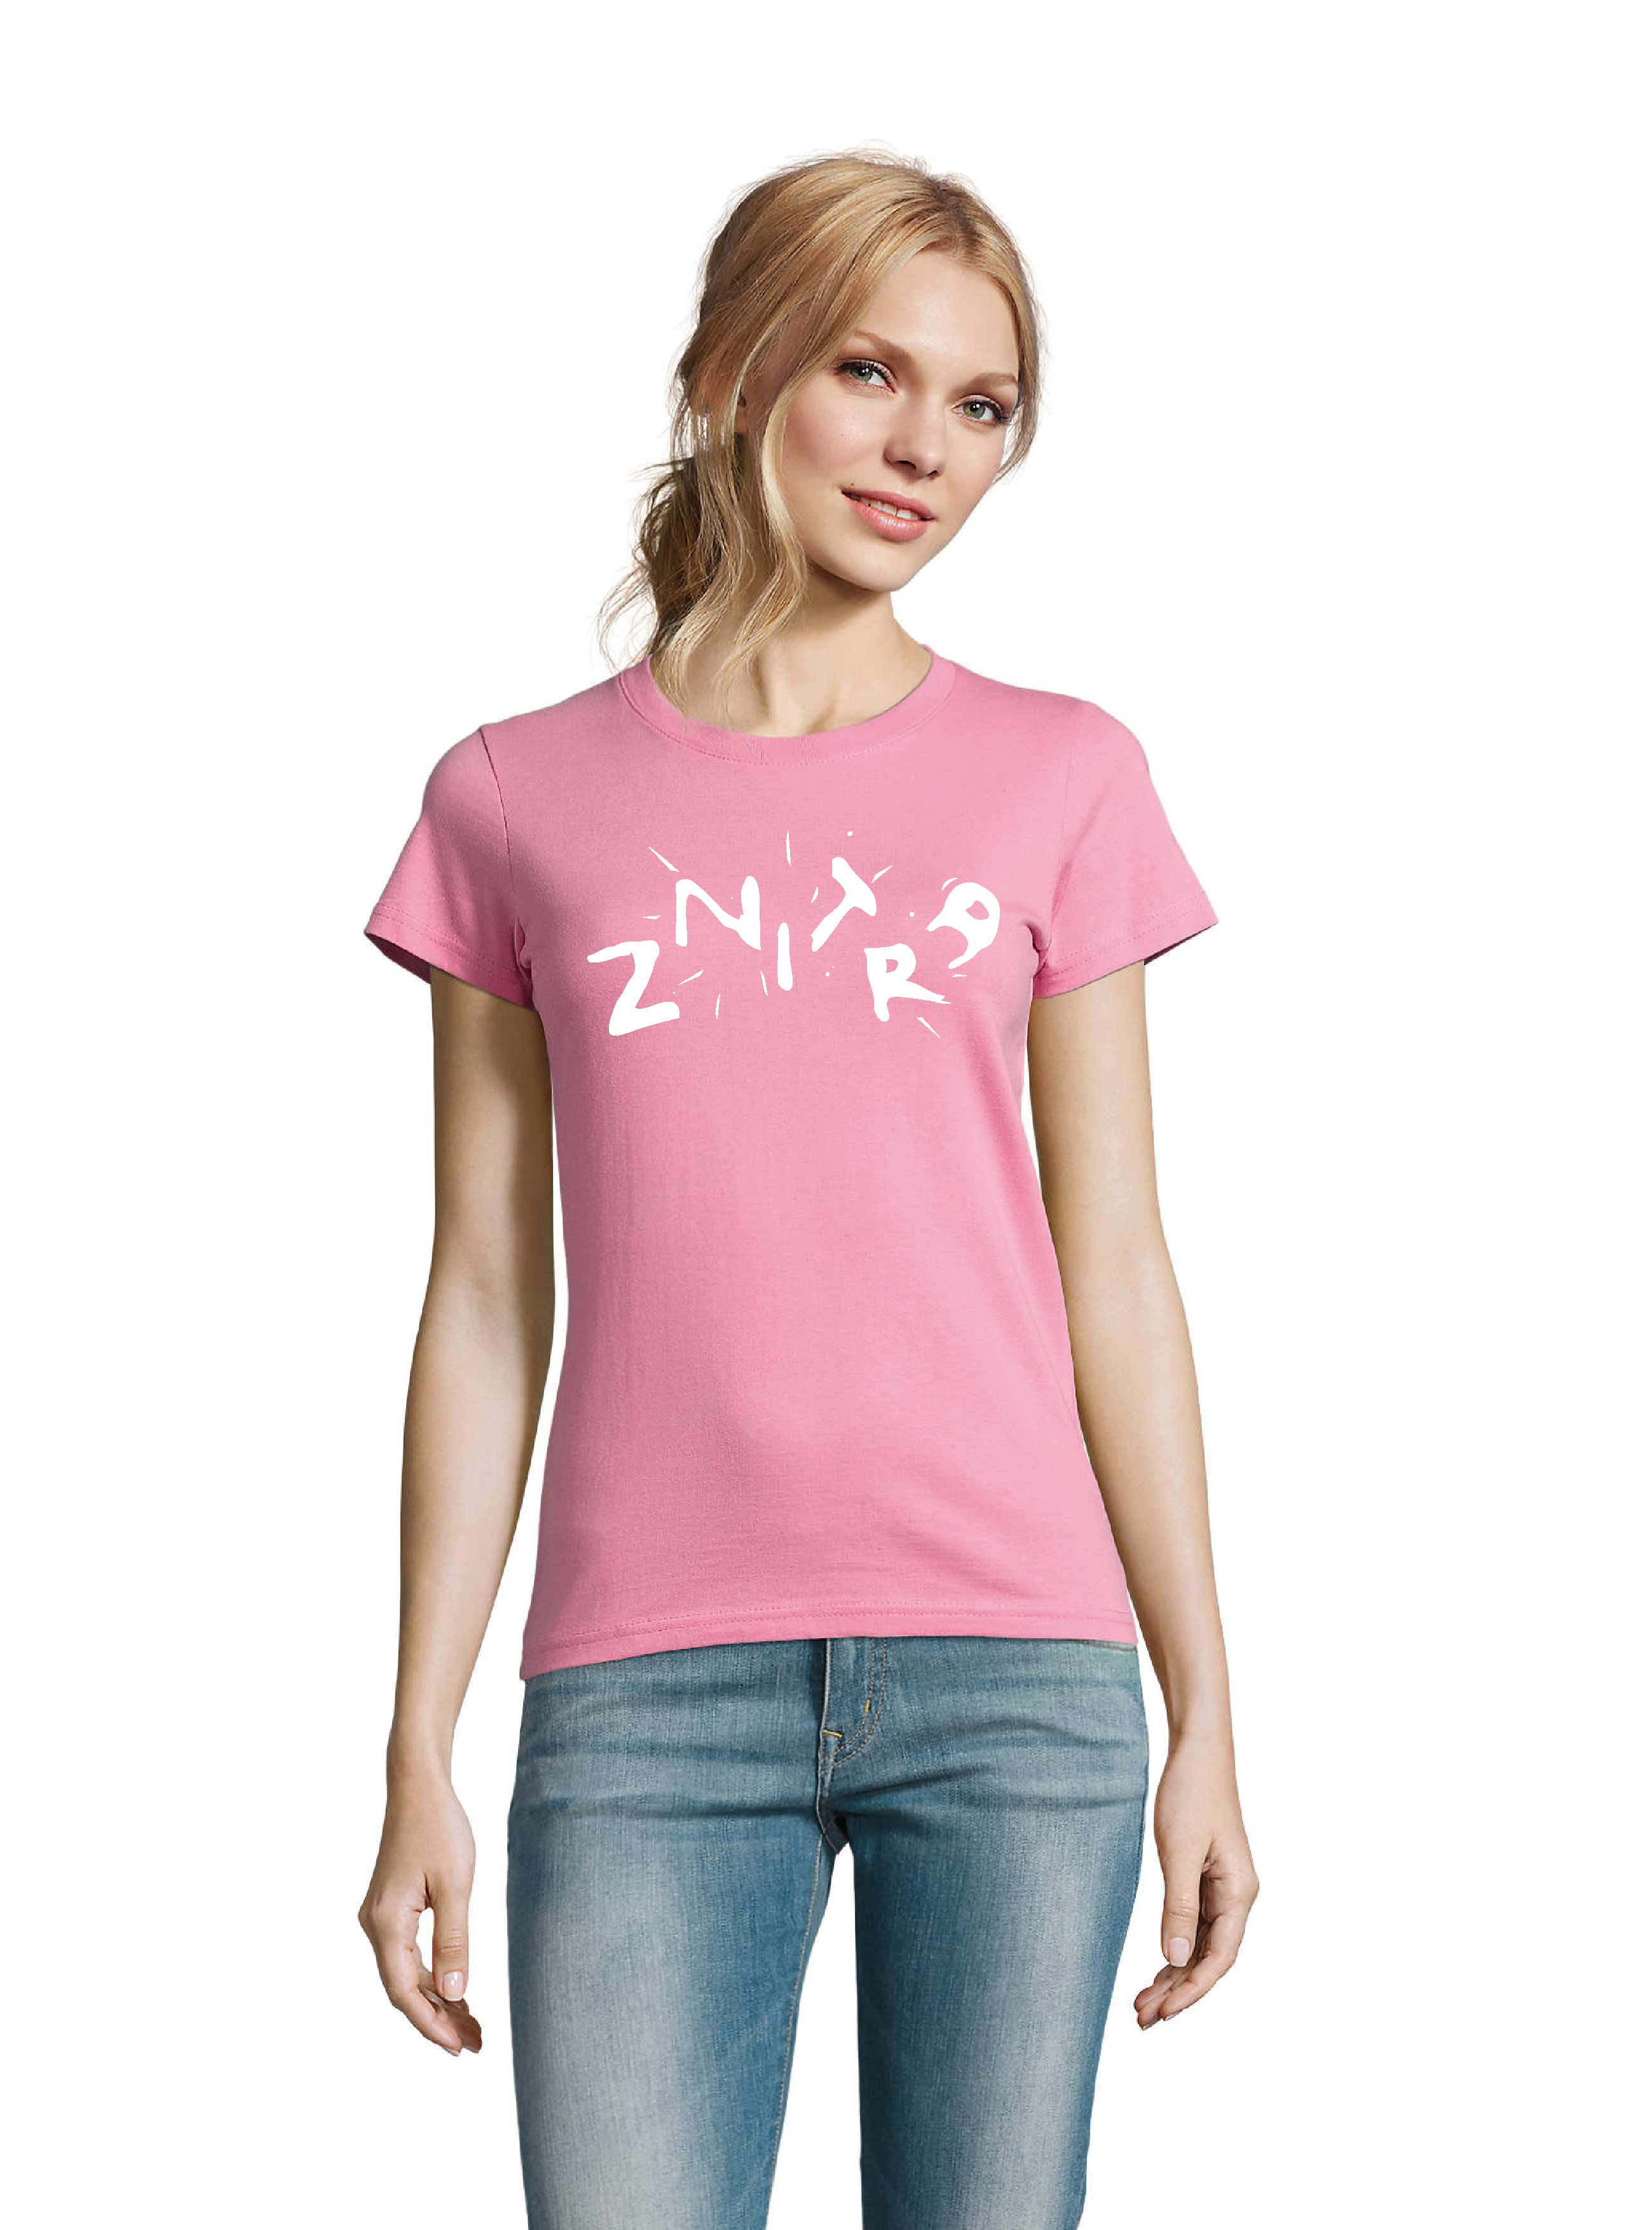 woman tshirt orchid color front